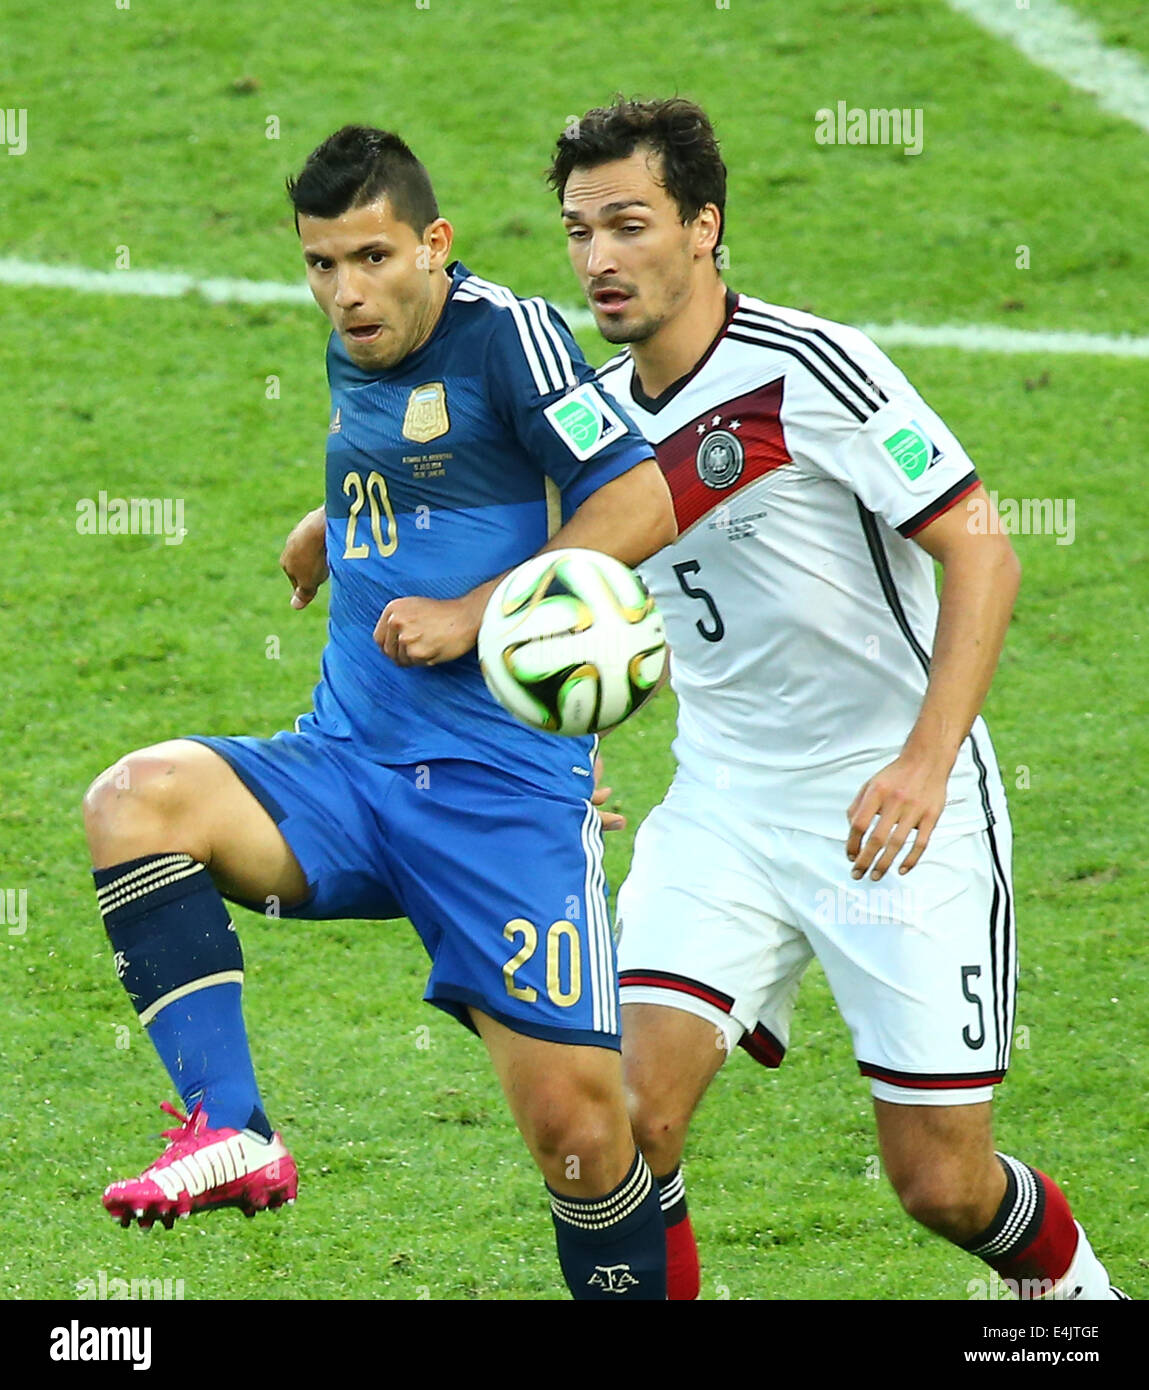 Rio De Janeiro, Brazil. 13th July, 2014. Germany's Mats Hummels vies with Argentina's Sergio Aguero during the final match between Germany and Argentina of 2014 FIFA World Cup at the Estadio do Maracana Stadium in Rio de Janeiro, Brazil, on July 13, 2014. Credit:  Chen Jianli/Xinhua/Alamy Live News Stock Photo